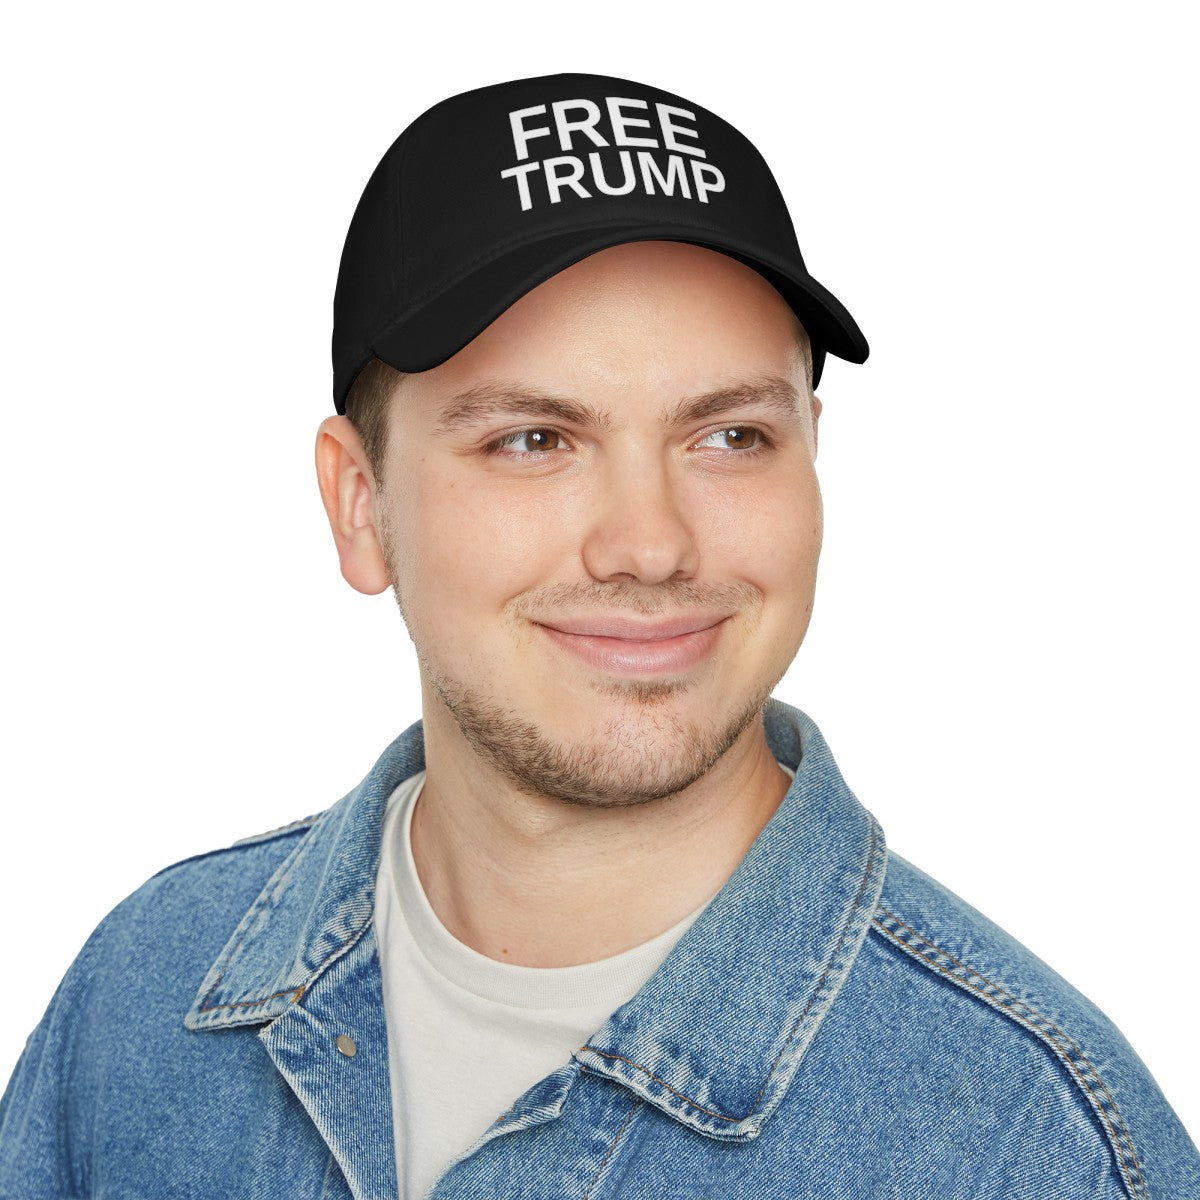 Get trendy with Free Trump Baseball Cap -  available at Good Gift Company. Grab yours for $21.98 today!